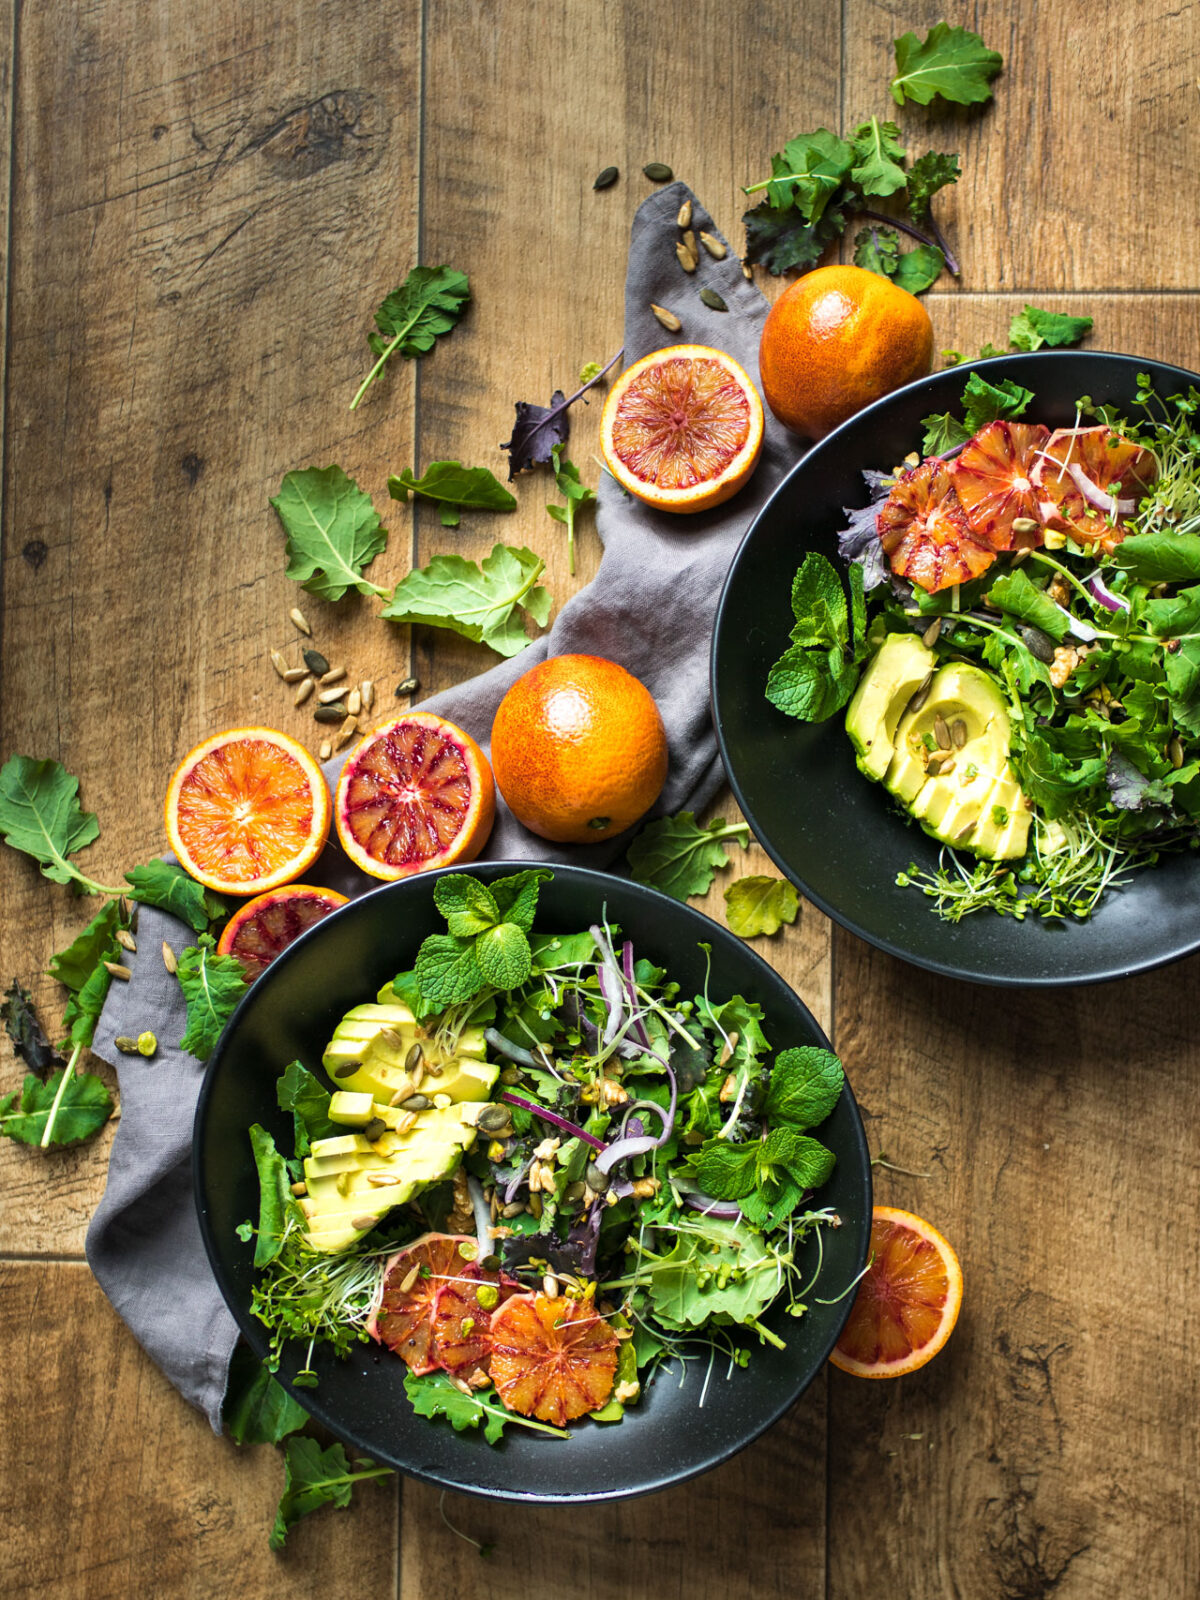 A delicious, winter salad featuring blood oranges and balsamic vinegar on black plates on a wooden table with blood oranges cut in half.